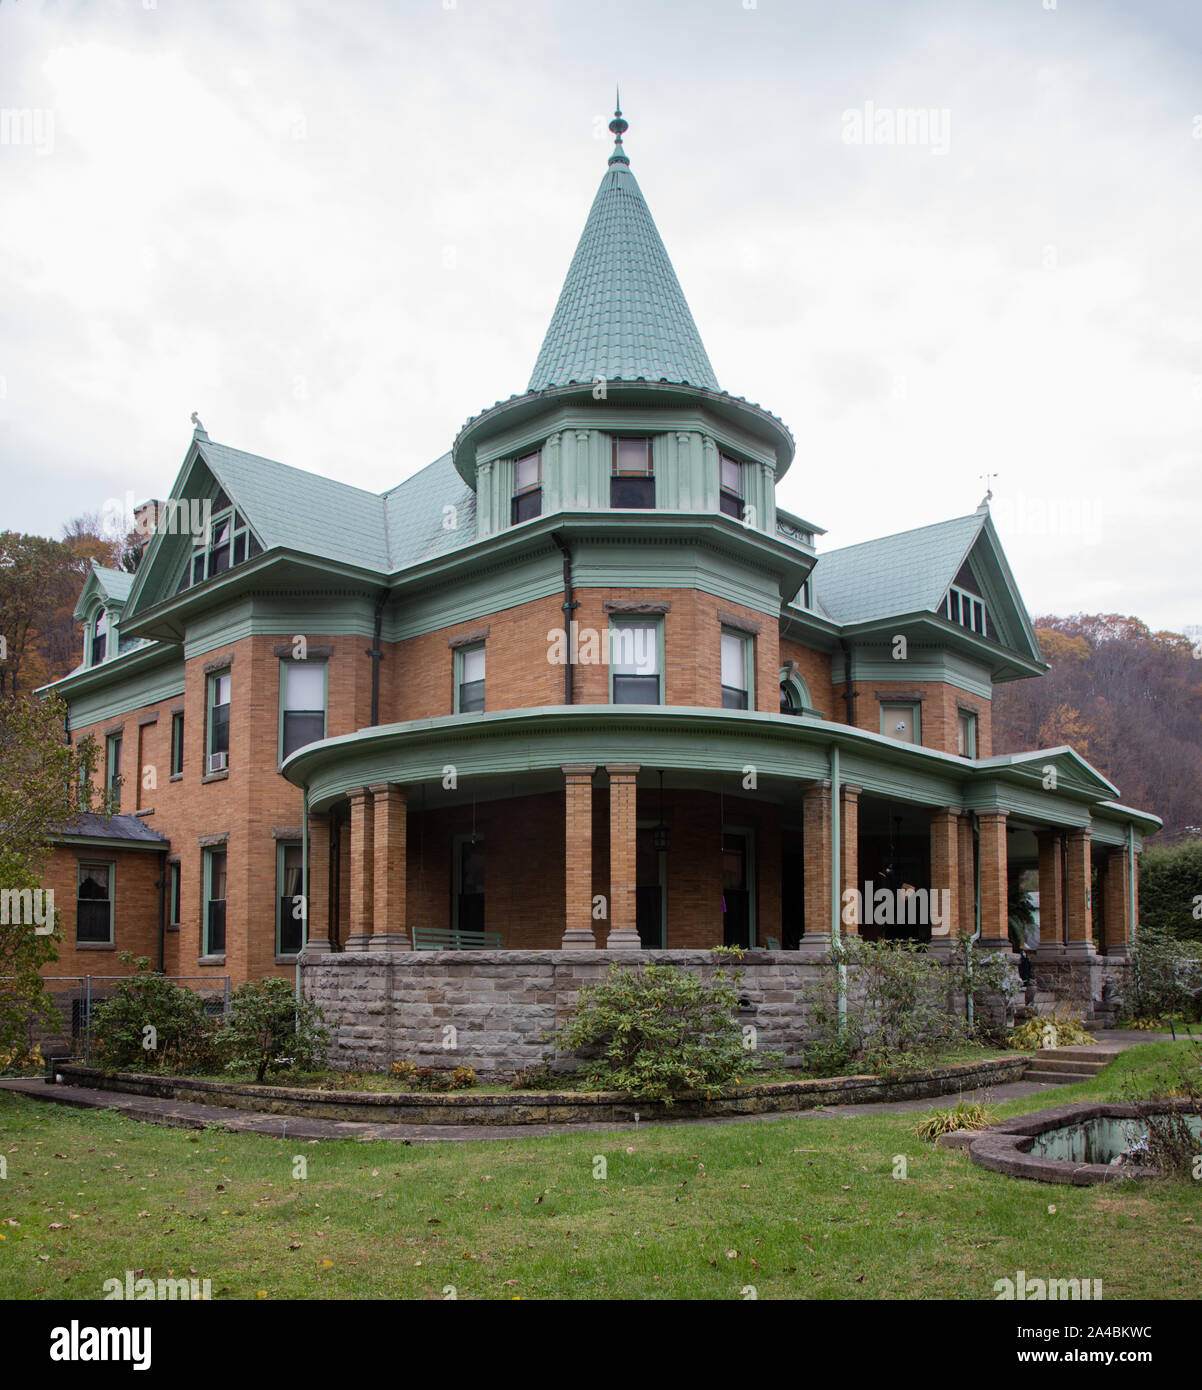 The Cooper House in Bramwell, known as the Millionaires' Town in West Virginia's Southern Coalfields, which extended for 40 miles from Bramwell, which, it is said, once housed more millionaires per capita than any other town in America in the late 1800s Stock Photo